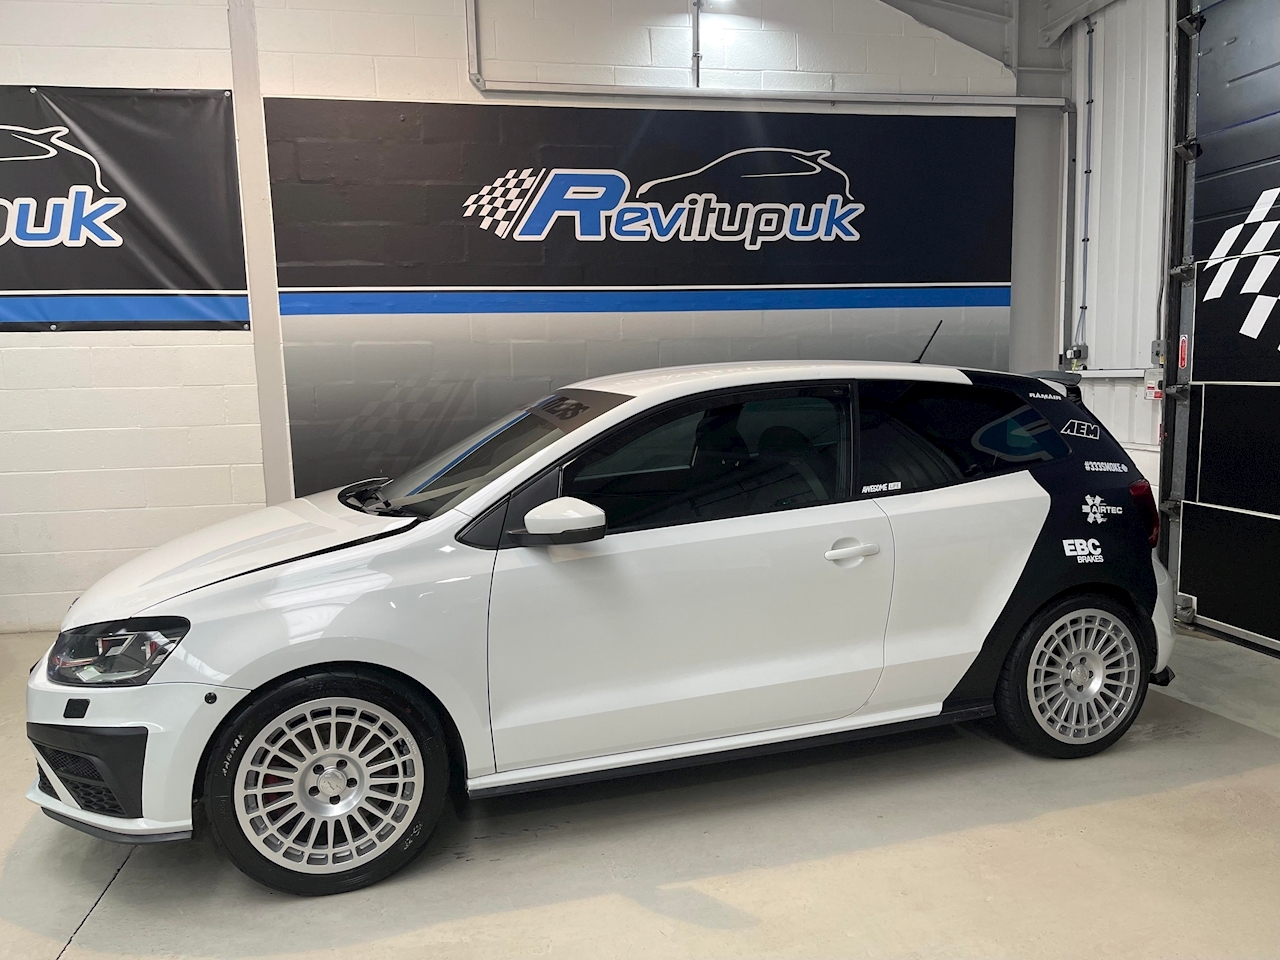 VOLKSWAGEN POLO volkswagen-polo-v-6r-2-hand-kw-bbs-tuning-sidney